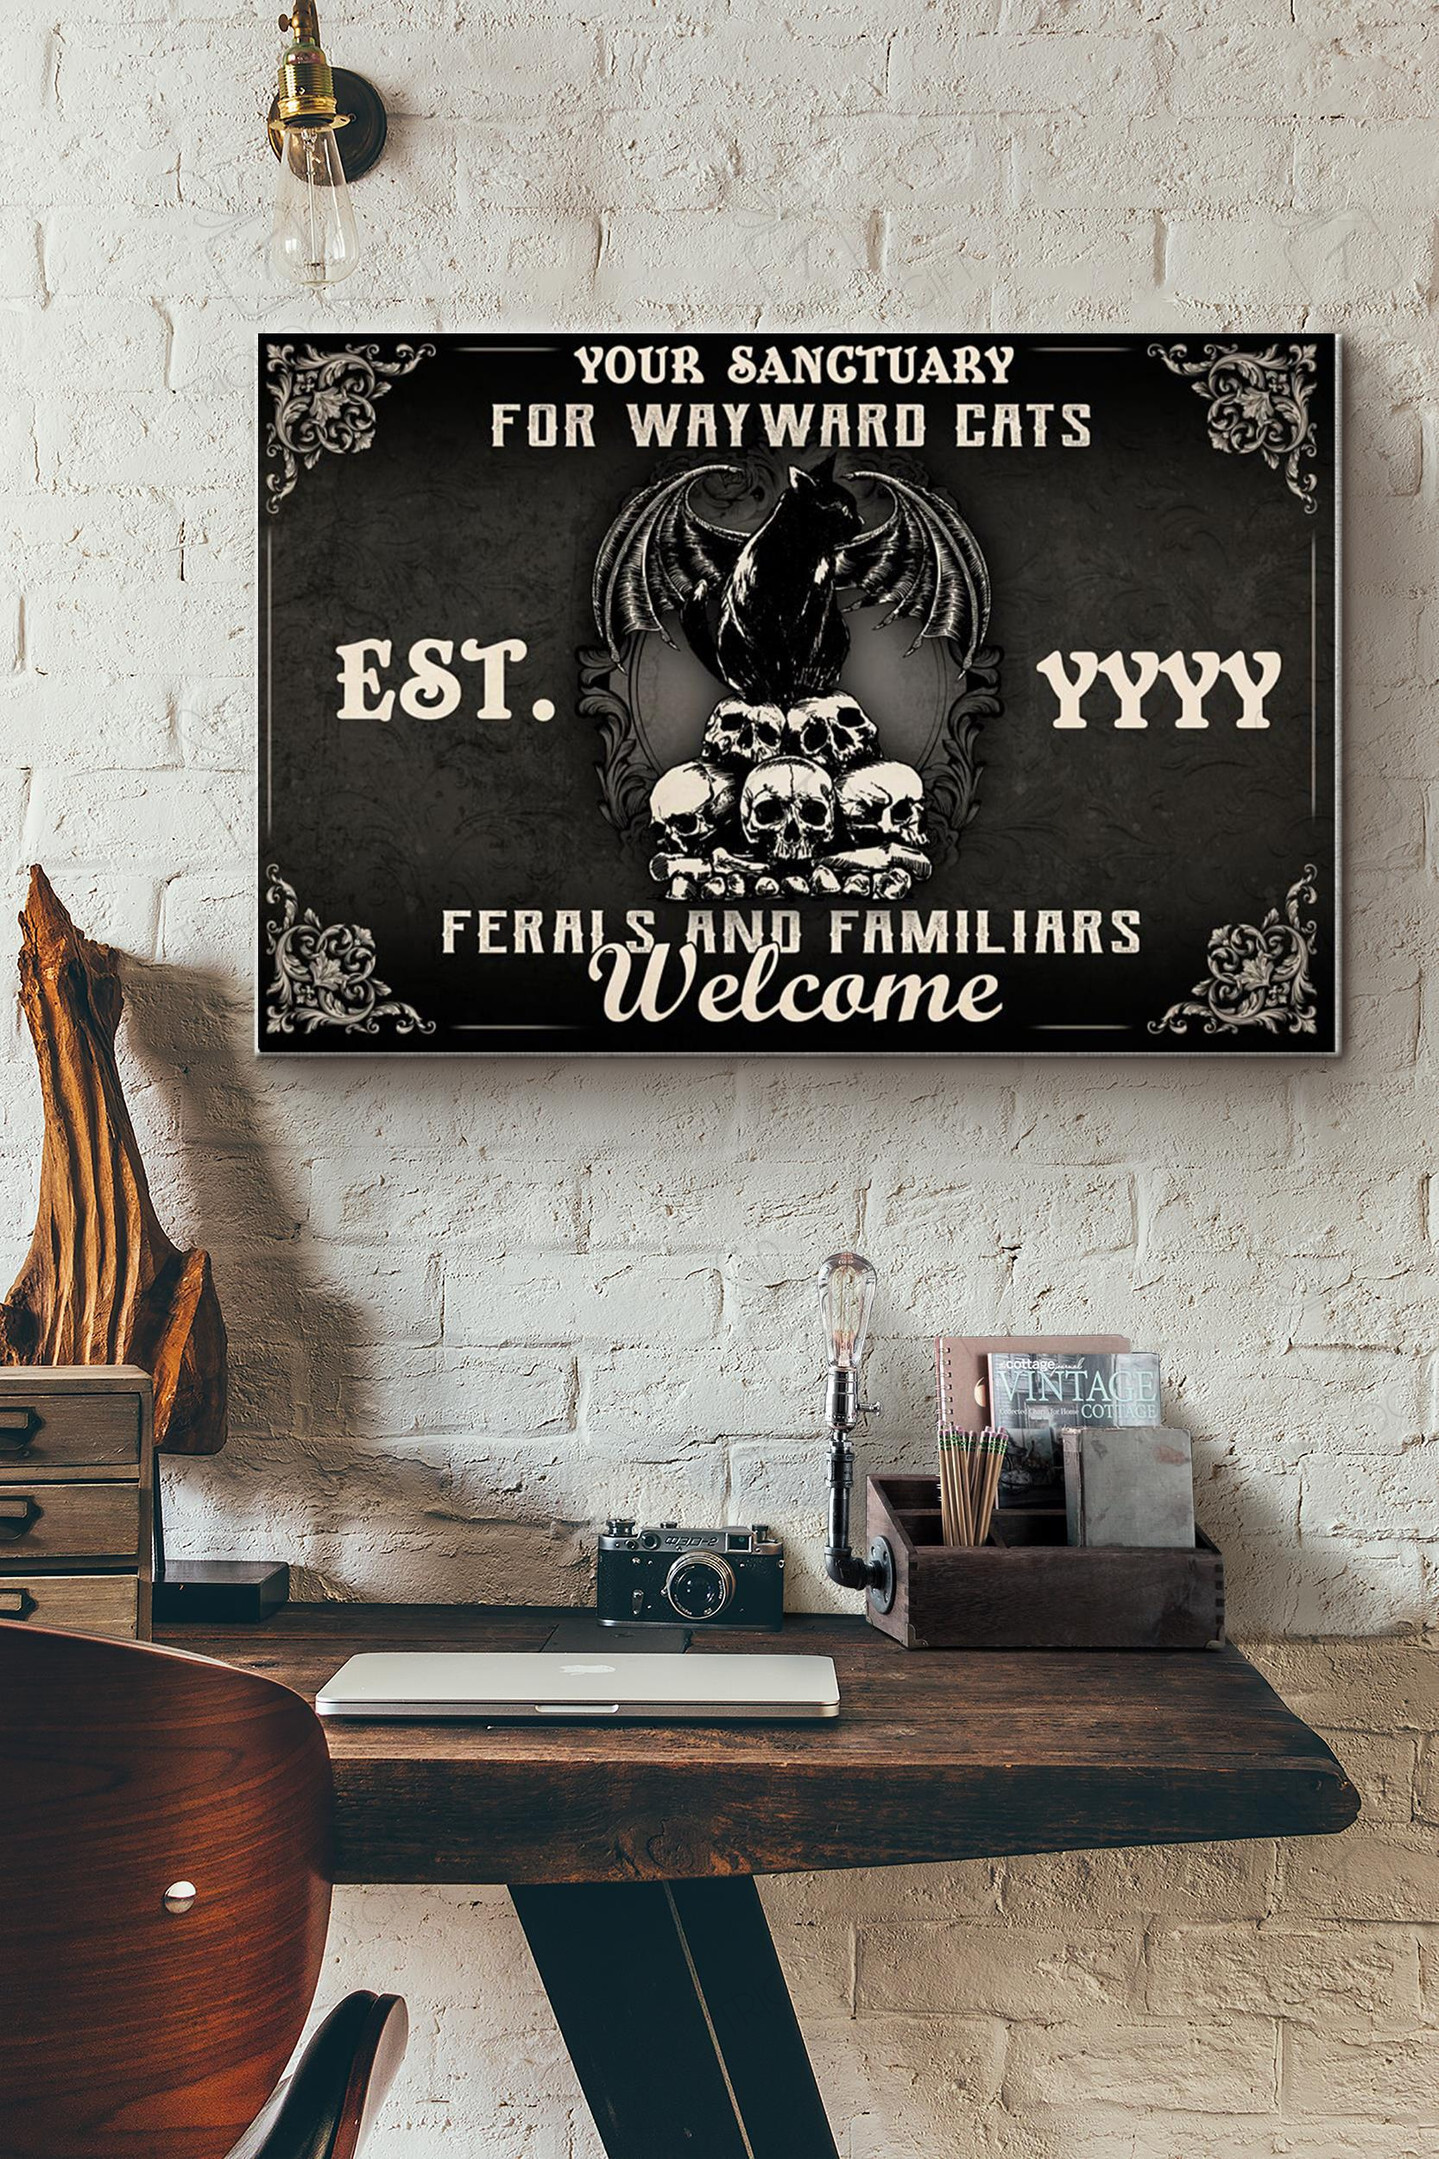 Your Sangtuary For Wayward Cats Ferals And Familiars Welcome Canvas Painting Ideas, Canvas Hanging Prints, Gift Idea Framed Prints, Canvas Paintings Wrapped Canvas 8x10